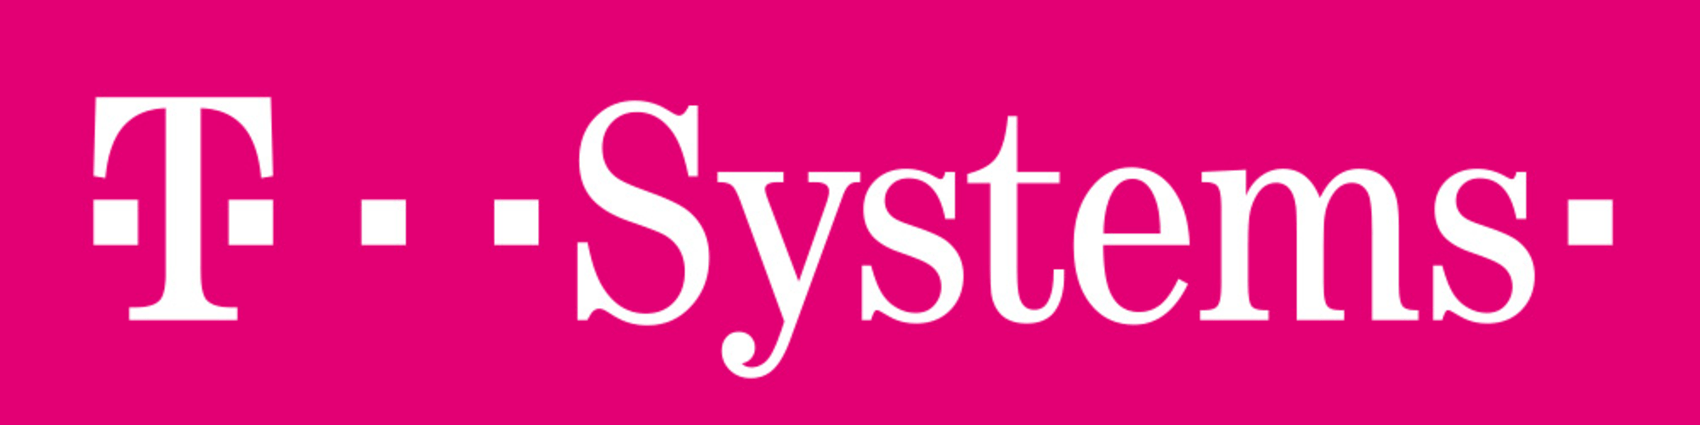 T-Systems Logo - Information and communication technology by T-Systems